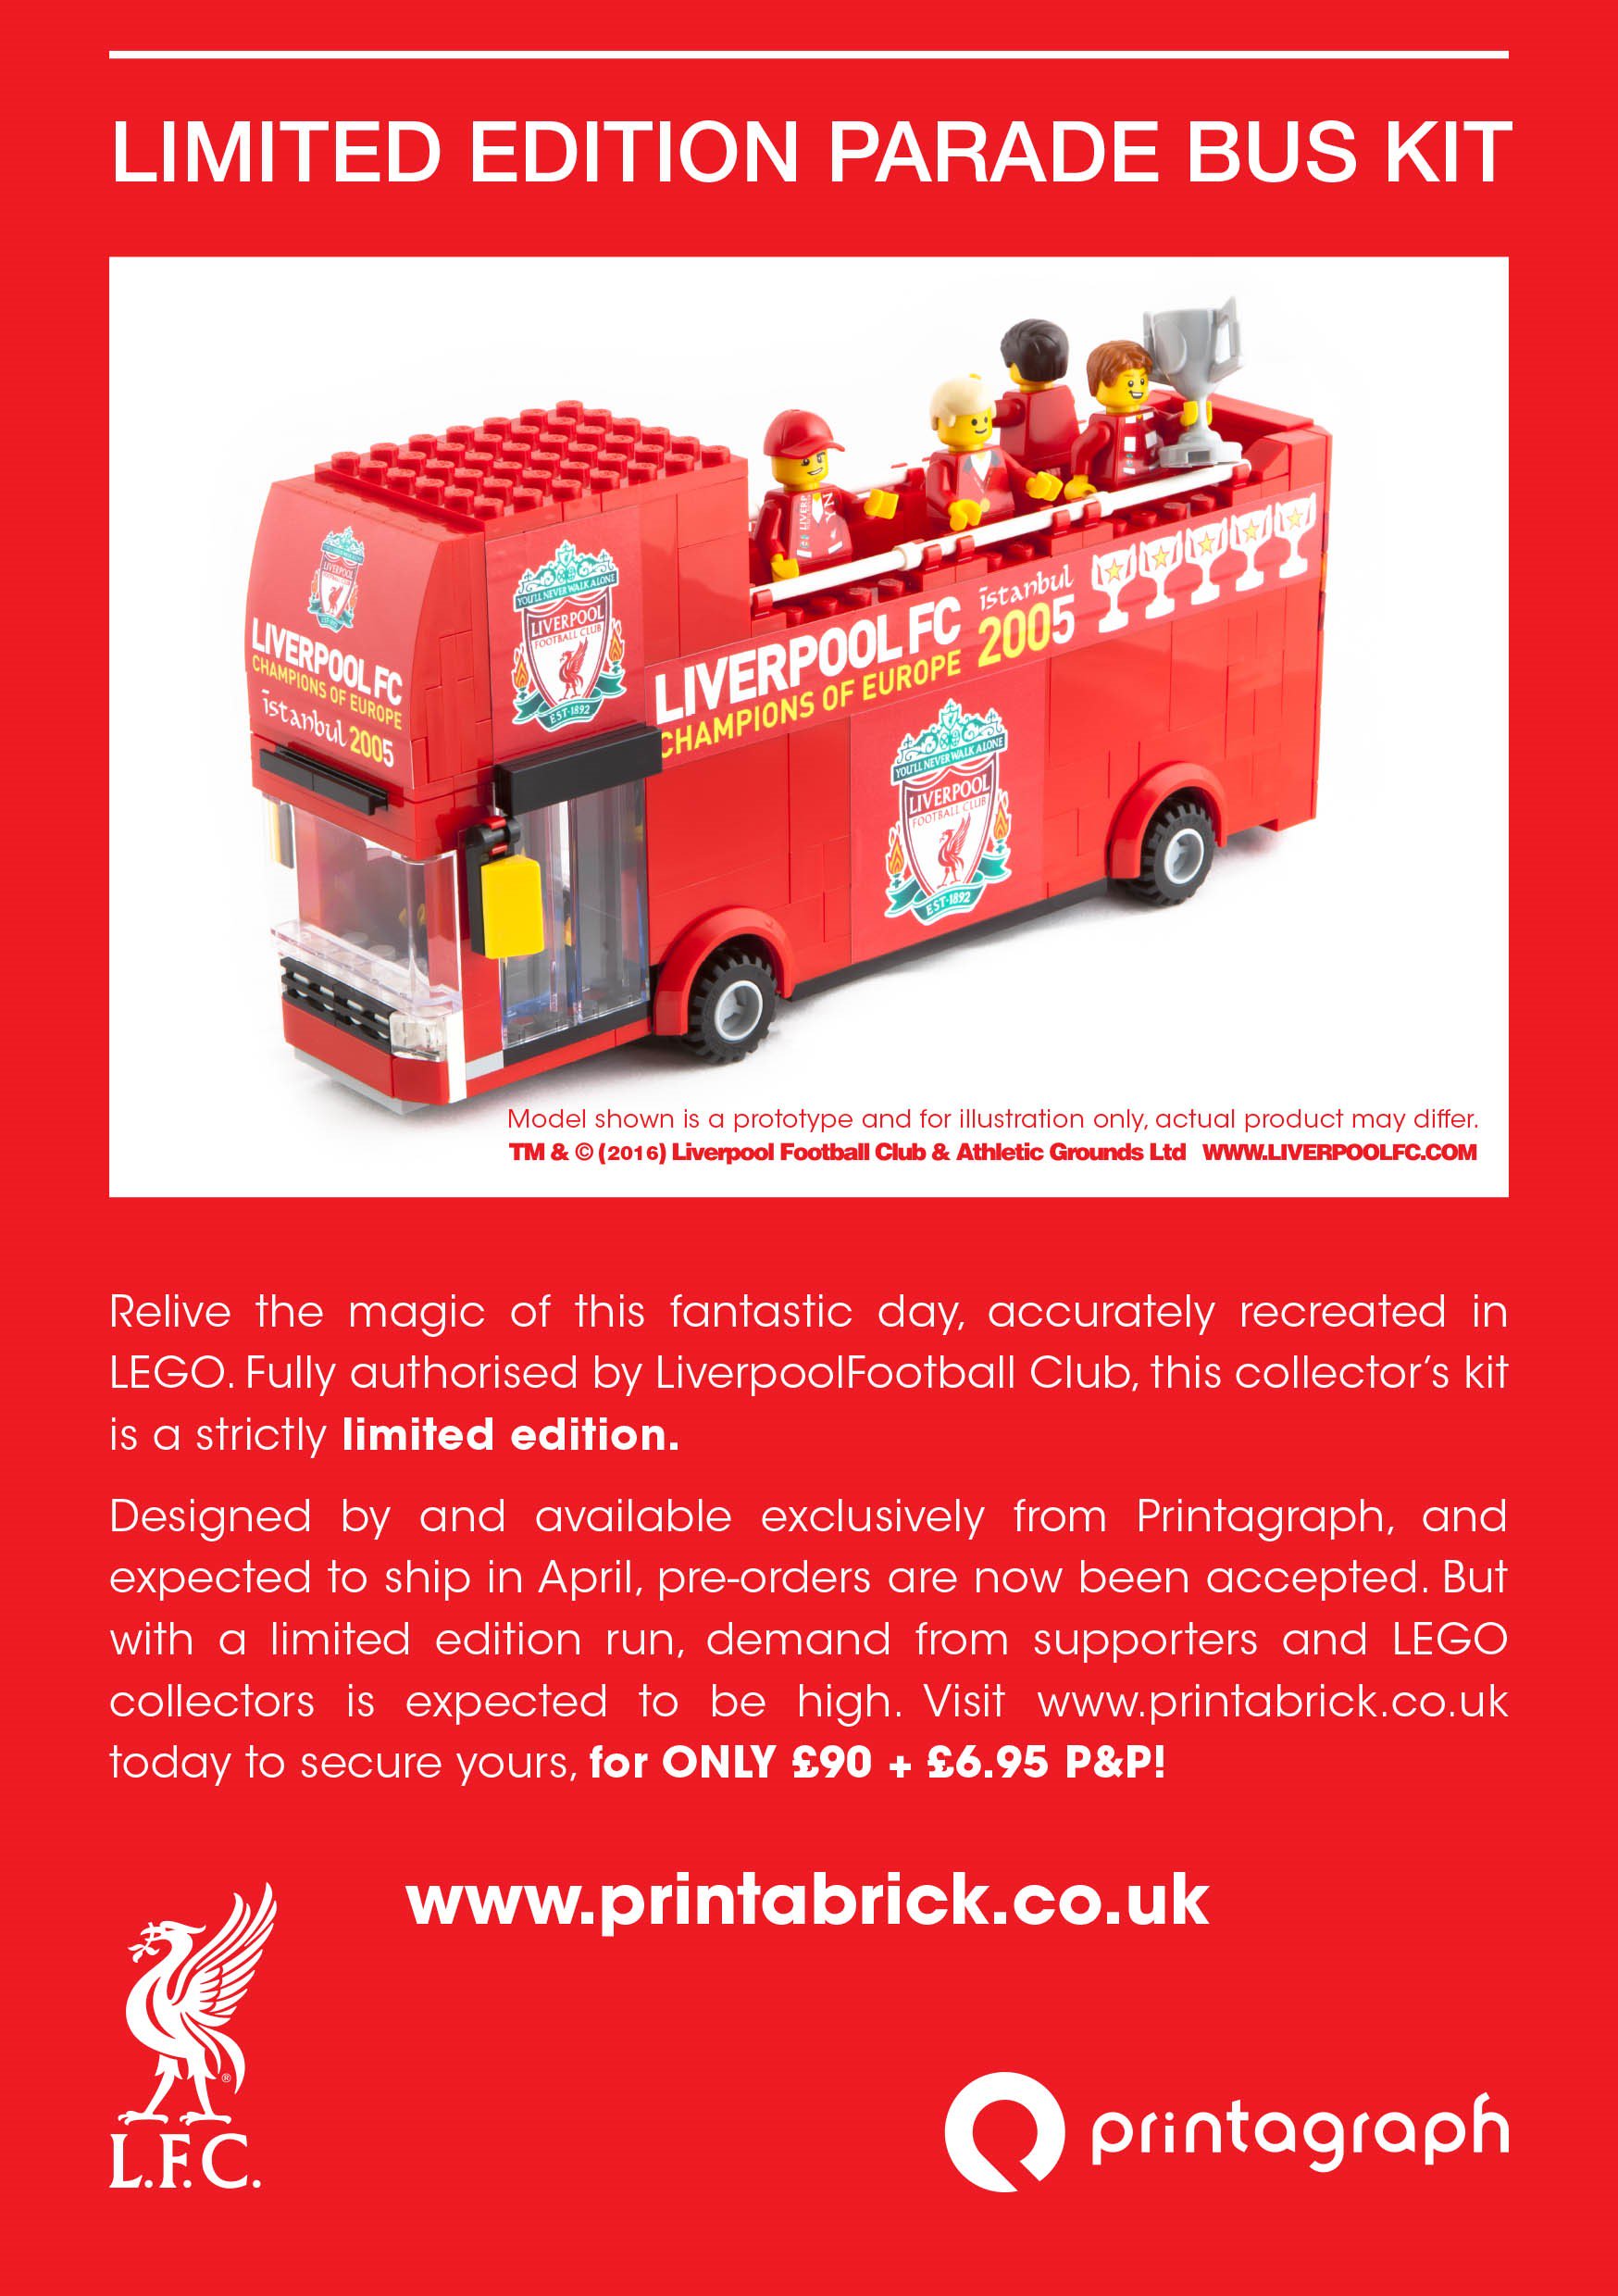 Printabrick on Twitter: "New Liverpool FC LEGO parade bus. It's for real! Not an Aprils #Liverpool #LEGO Available order now. https://t.co/abivvDXPal" / Twitter